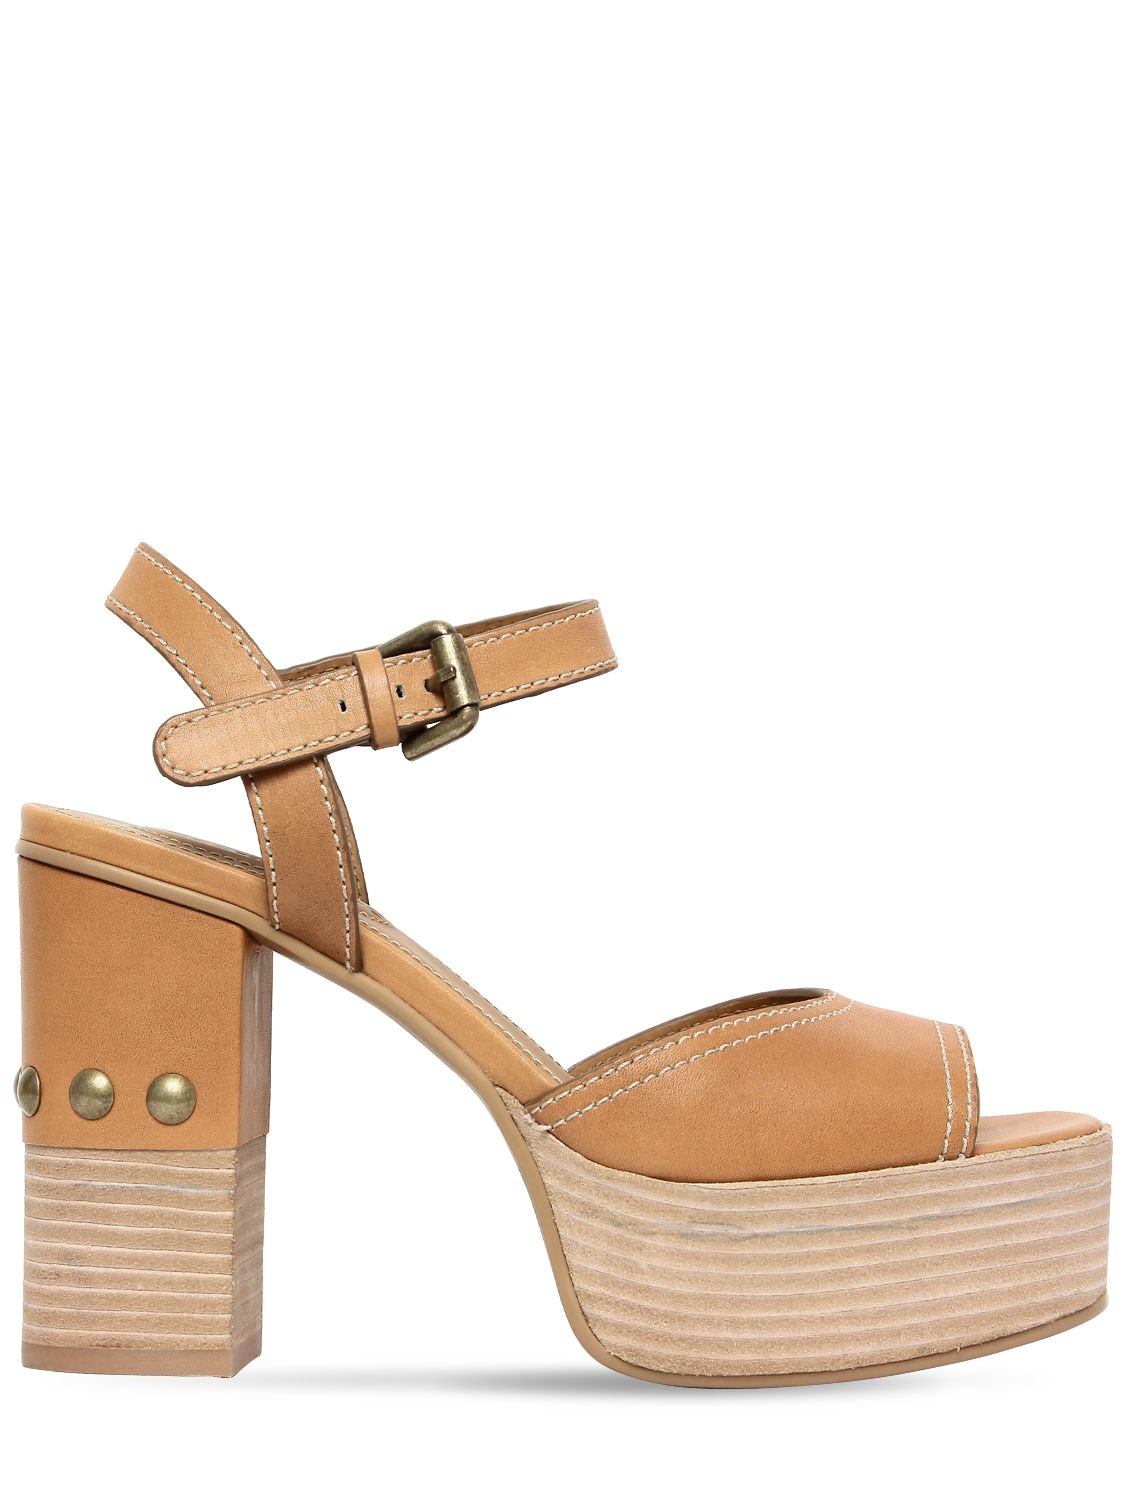 SEE BY CHLOÉ 105MM LEATHER SANDALS W/ STUDS,67IL4L002-MTQY0